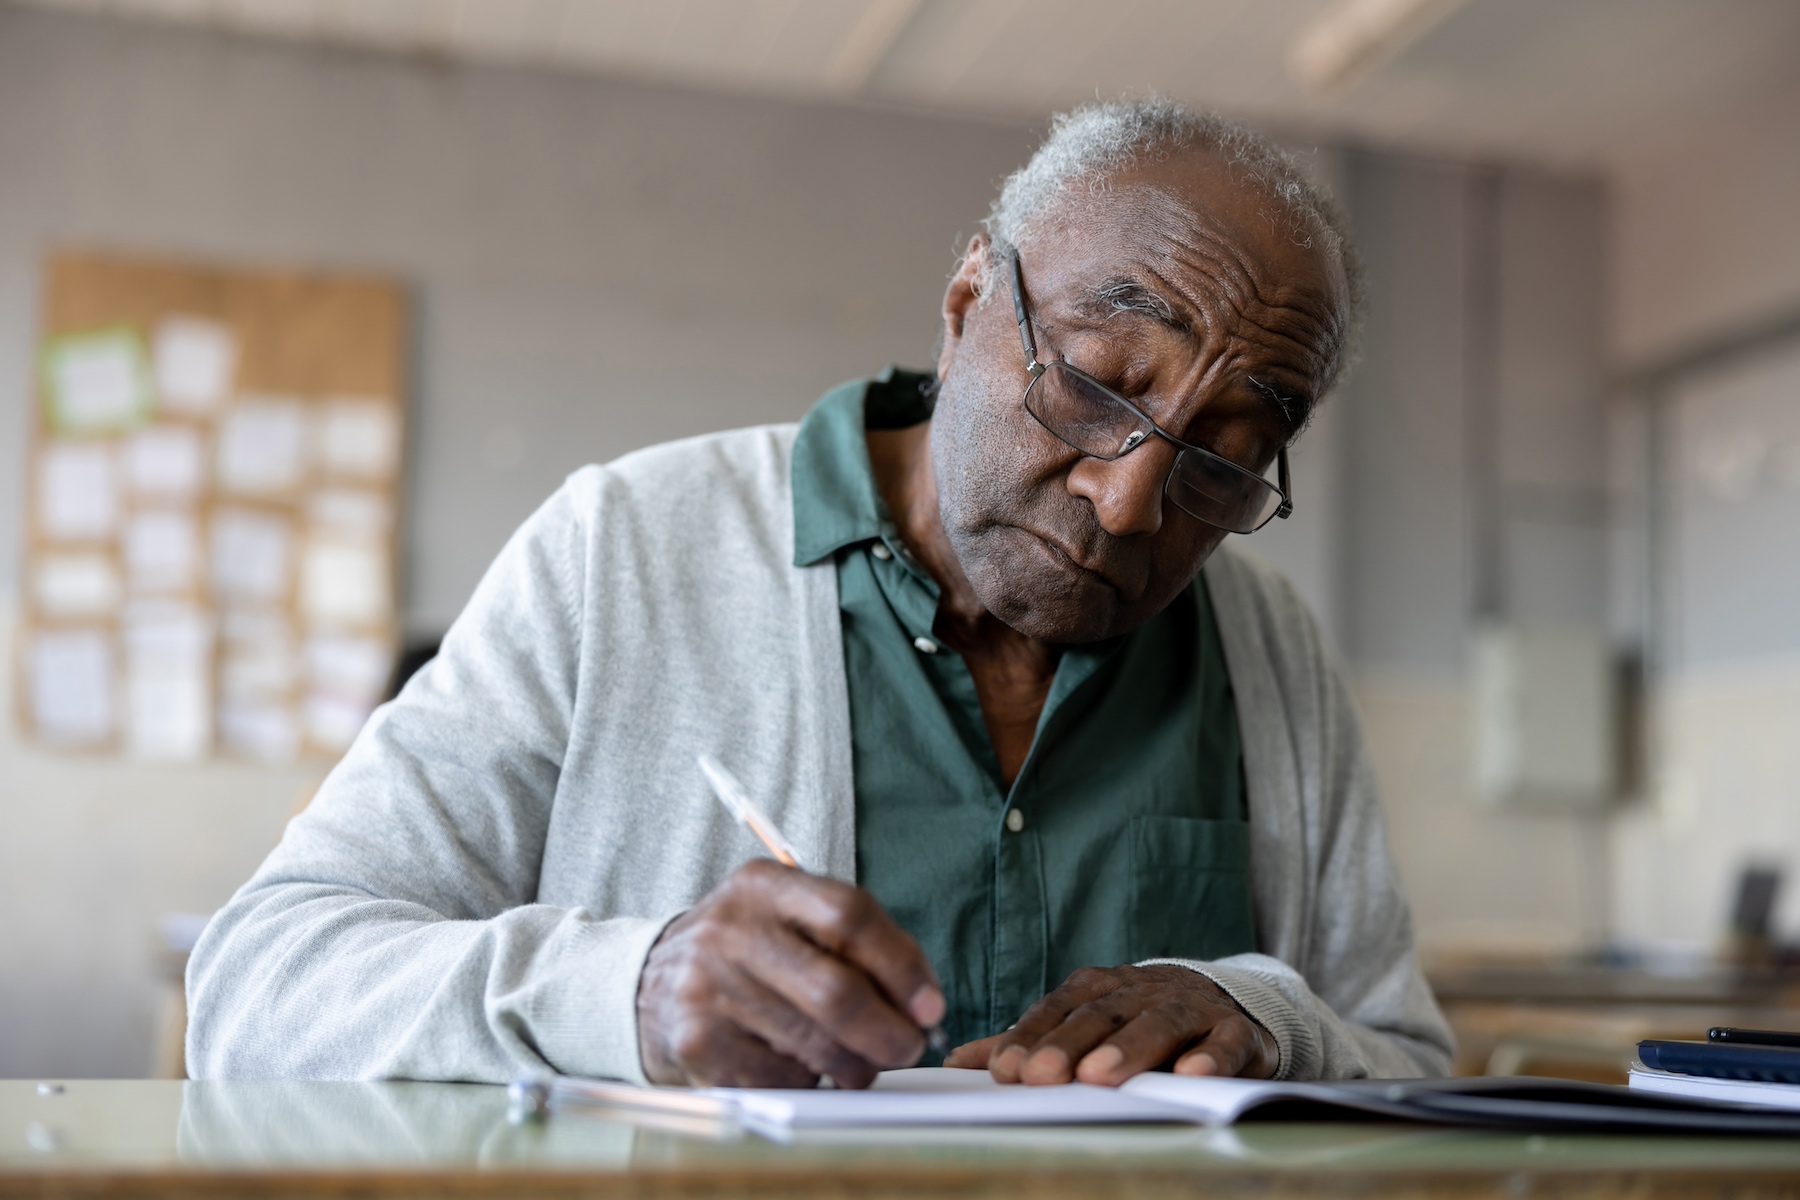 An older man takes a written language test in a classroom with pencil and paper